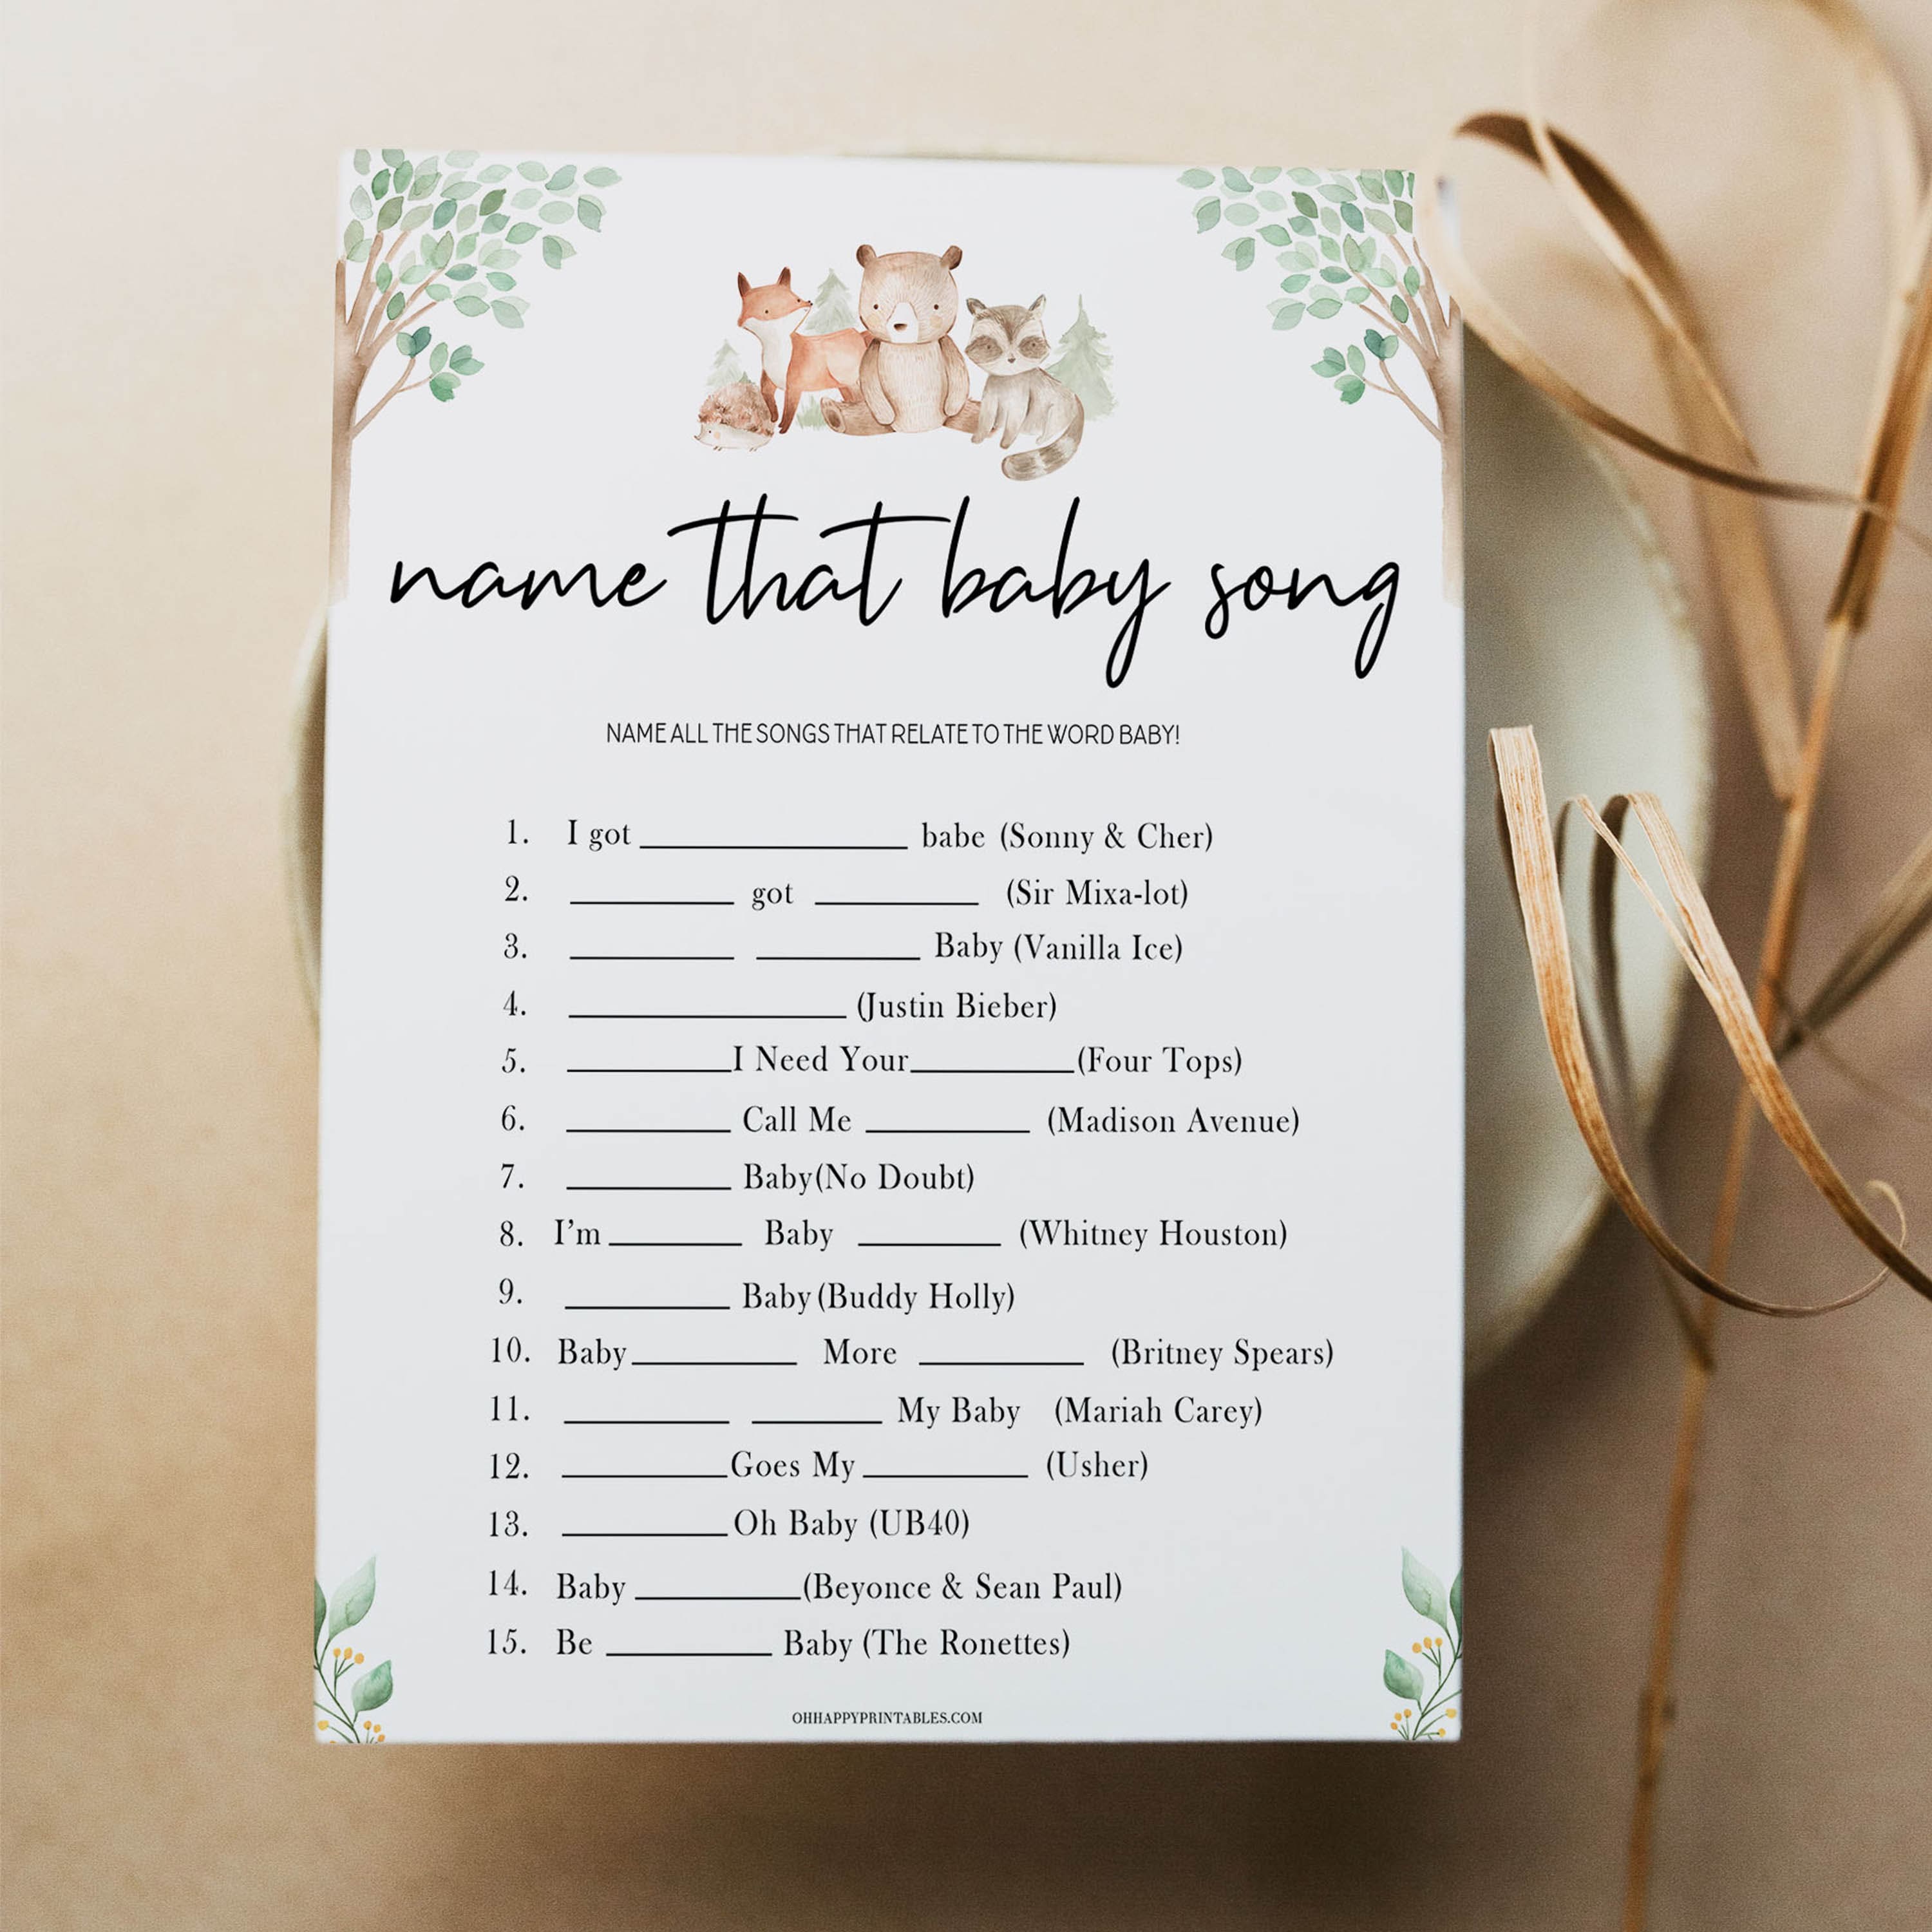 name that baby song game, Printable baby shower games, woodland animals baby games, baby shower games, fun baby shower ideas, top baby shower ideas, woodland baby shower, baby shower games, fun woodland animals baby shower ideas